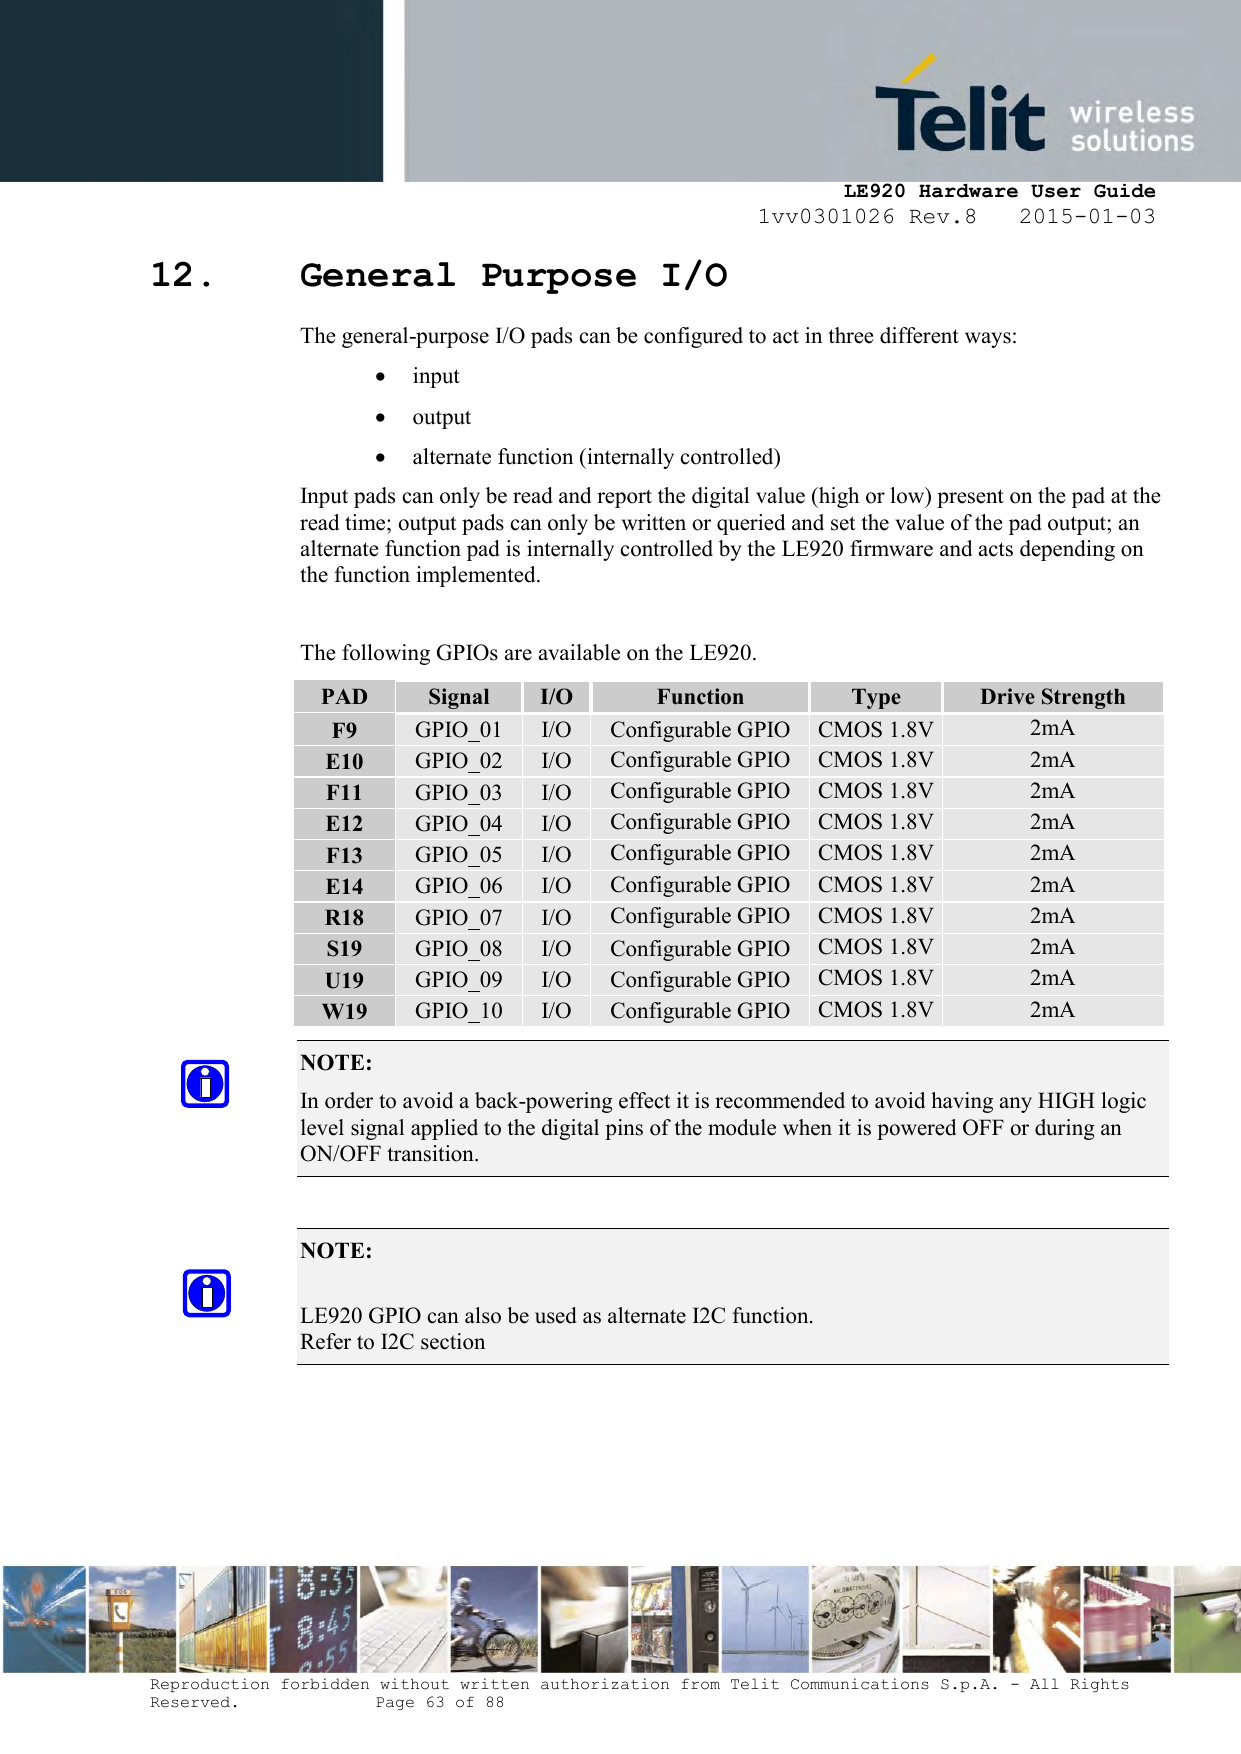     LE920 Hardware User Guide 1vv0301026 Rev.8   2015-01-03 Reproduction forbidden without written authorization from Telit Communications S.p.A. - All Rights Reserved.    Page 63 of 88  12. General Purpose I/O The general-purpose I/O pads can be configured to act in three different ways:  input  output  alternate function (internally controlled) Input pads can only be read and report the digital value (high or low) present on the pad at the read time; output pads can only be written or queried and set the value of the pad output; an alternate function pad is internally controlled by the LE920 firmware and acts depending on the function implemented.  The following GPIOs are available on the LE920. PAD Signal I/O Function Type Drive Strength F9 GPIO_01 I/O Configurable GPIO CMOS 1.8V 2mA E10 GPIO_02 I/O Configurable GPIO CMOS 1.8V 2mA F11 GPIO_03 I/O Configurable GPIO CMOS 1.8V 2mA E12 GPIO_04 I/O Configurable GPIO CMOS 1.8V 2mA F13 GPIO_05 I/O Configurable GPIO CMOS 1.8V 2mA E14 GPIO_06 I/O Configurable GPIO CMOS 1.8V 2mA R18 GPIO_07 I/O Configurable GPIO CMOS 1.8V 2mA S19 GPIO_08 I/O Configurable GPIO CMOS 1.8V 2mA U19 GPIO_09 I/O Configurable GPIO CMOS 1.8V 2mA W19 GPIO_10 I/O Configurable GPIO CMOS 1.8V 2mA NOTE:  In order to avoid a back-powering effect it is recommended to avoid having any HIGH logic level signal applied to the digital pins of the module when it is powered OFF or during an ON/OFF transition.  NOTE:   LE920 GPIO can also be used as alternate I2C function. Refer to I2C section     